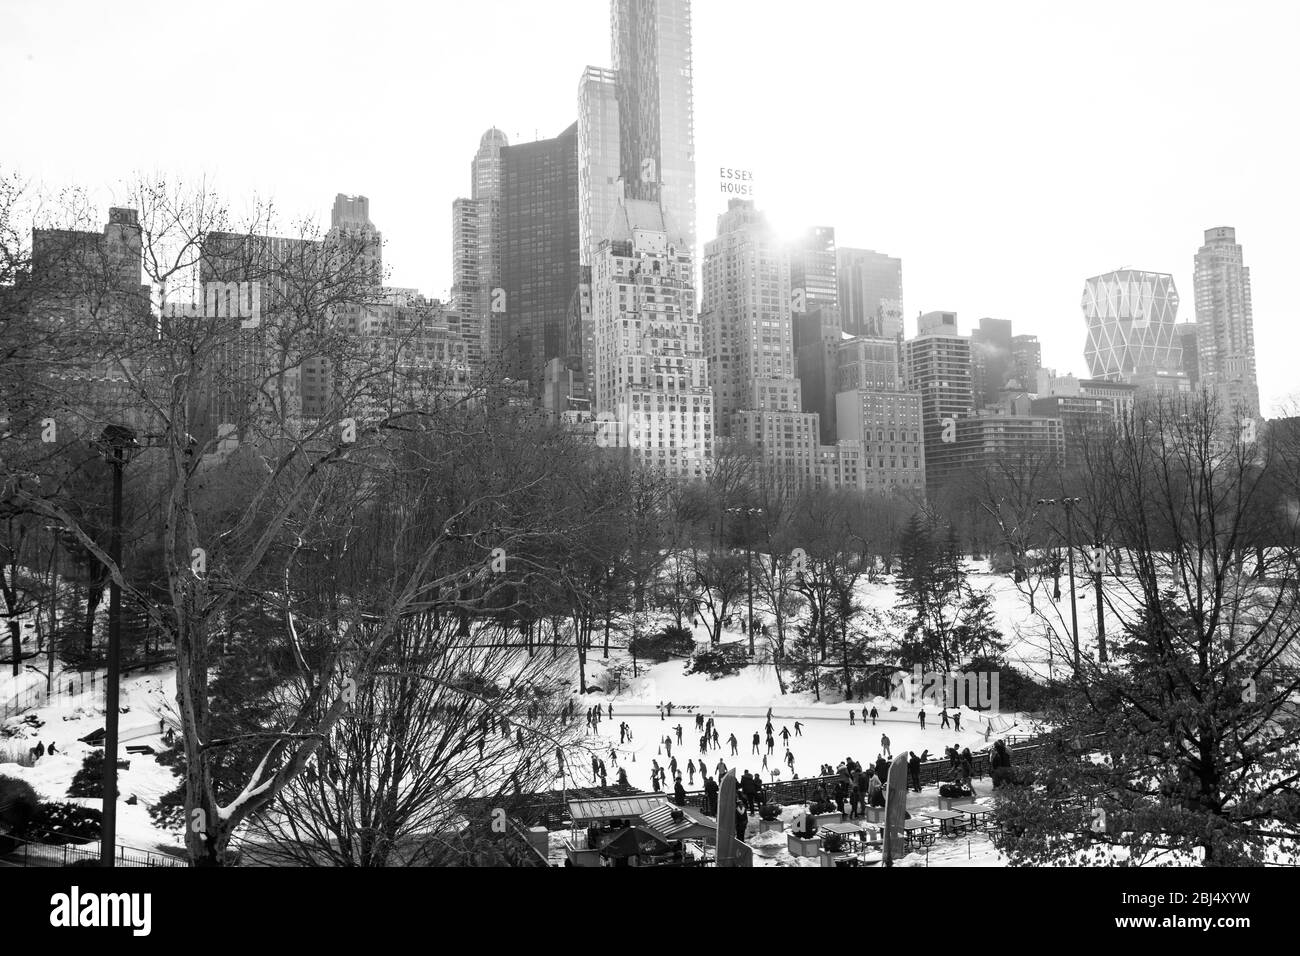 Winter view over the skyscrapers of New York City and the ice rink in Central Park. Stock Photo